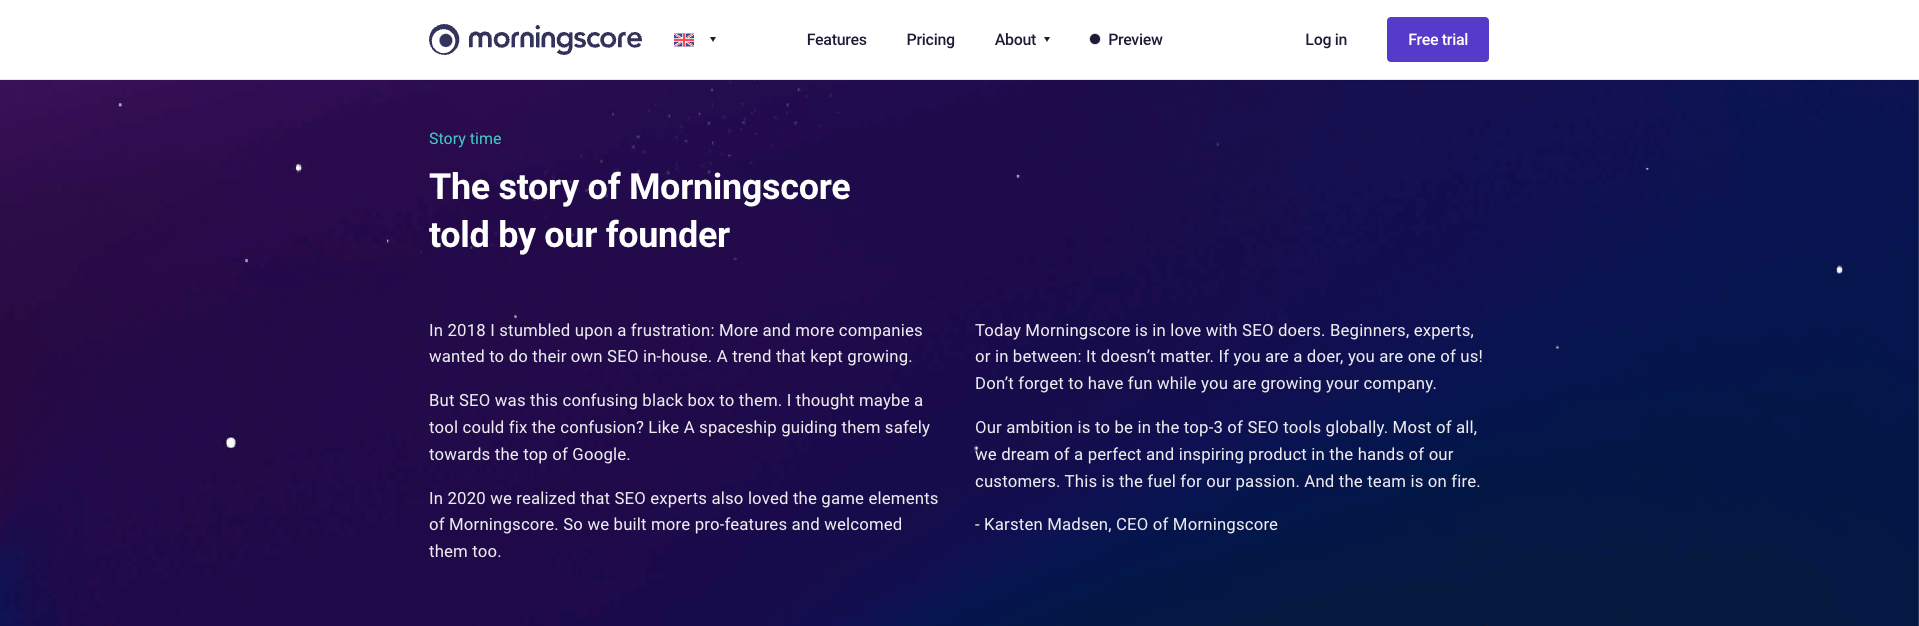 The history of Morningscore on the about page